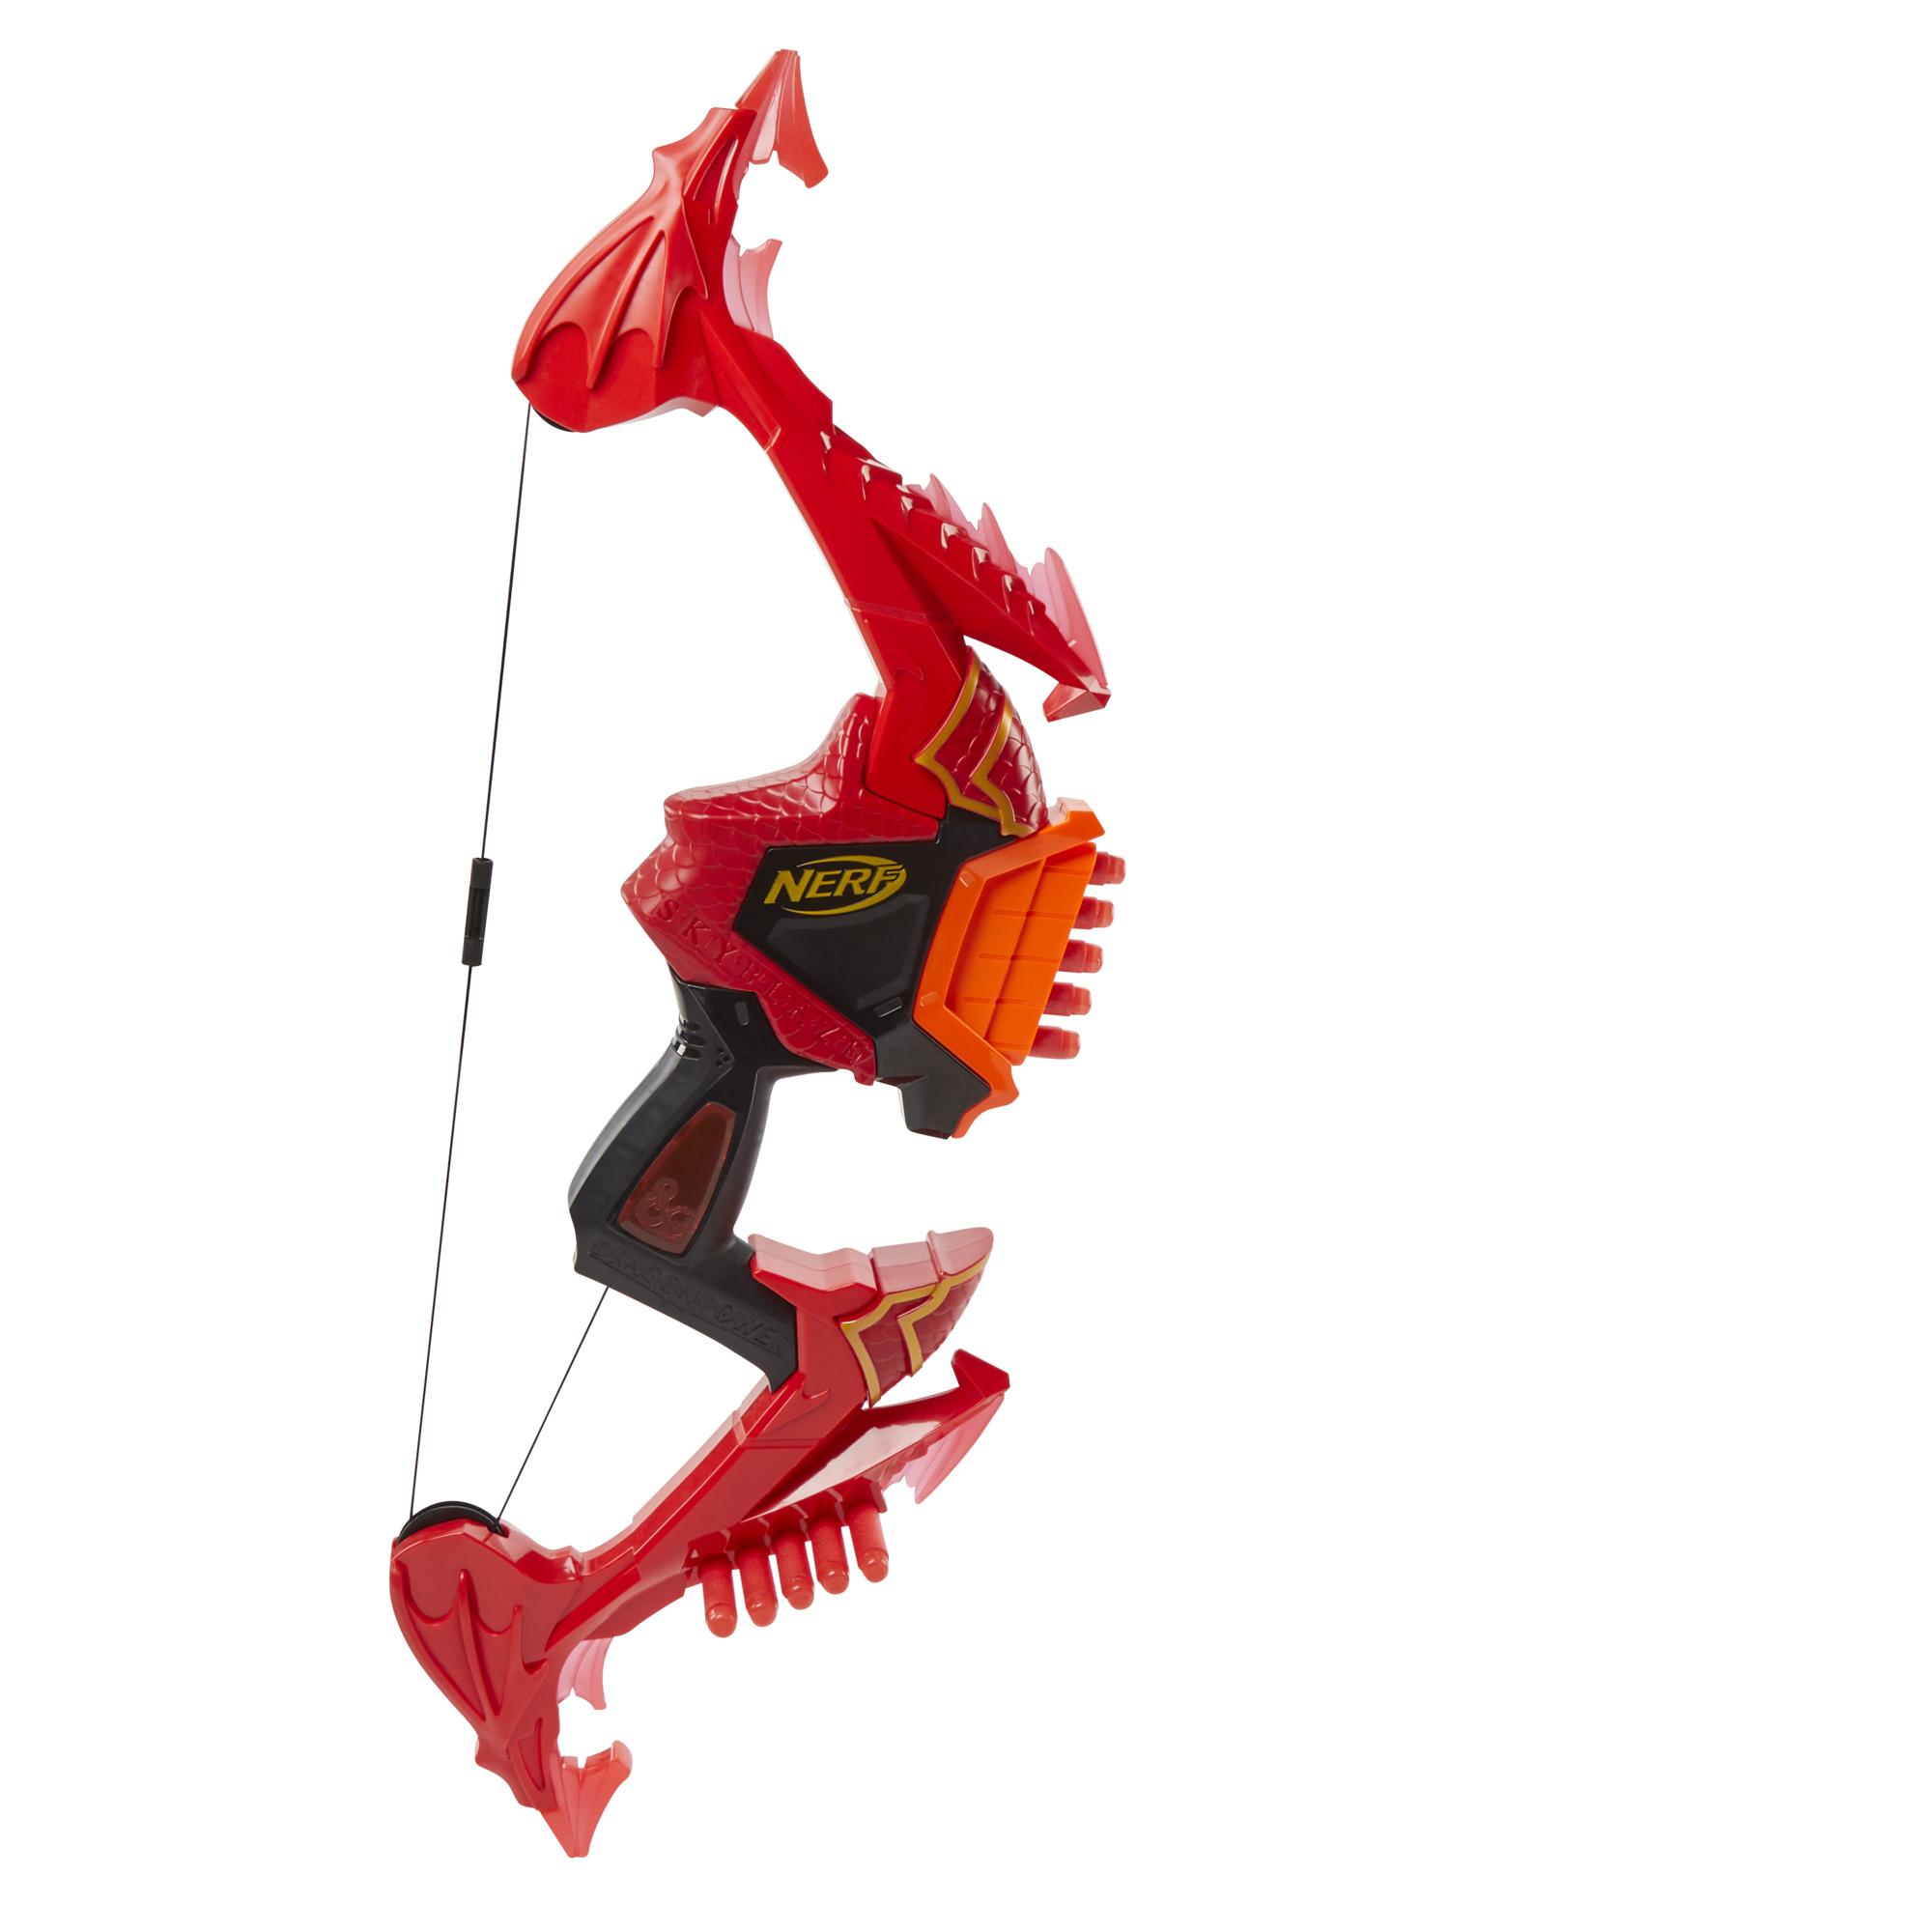 Nerf DragonPower Skyblaze Dart Bow, Inspired by Dungeons and Dragons, Dragon Bow Action, 10 Nerf Darts, 5-Dart Storage